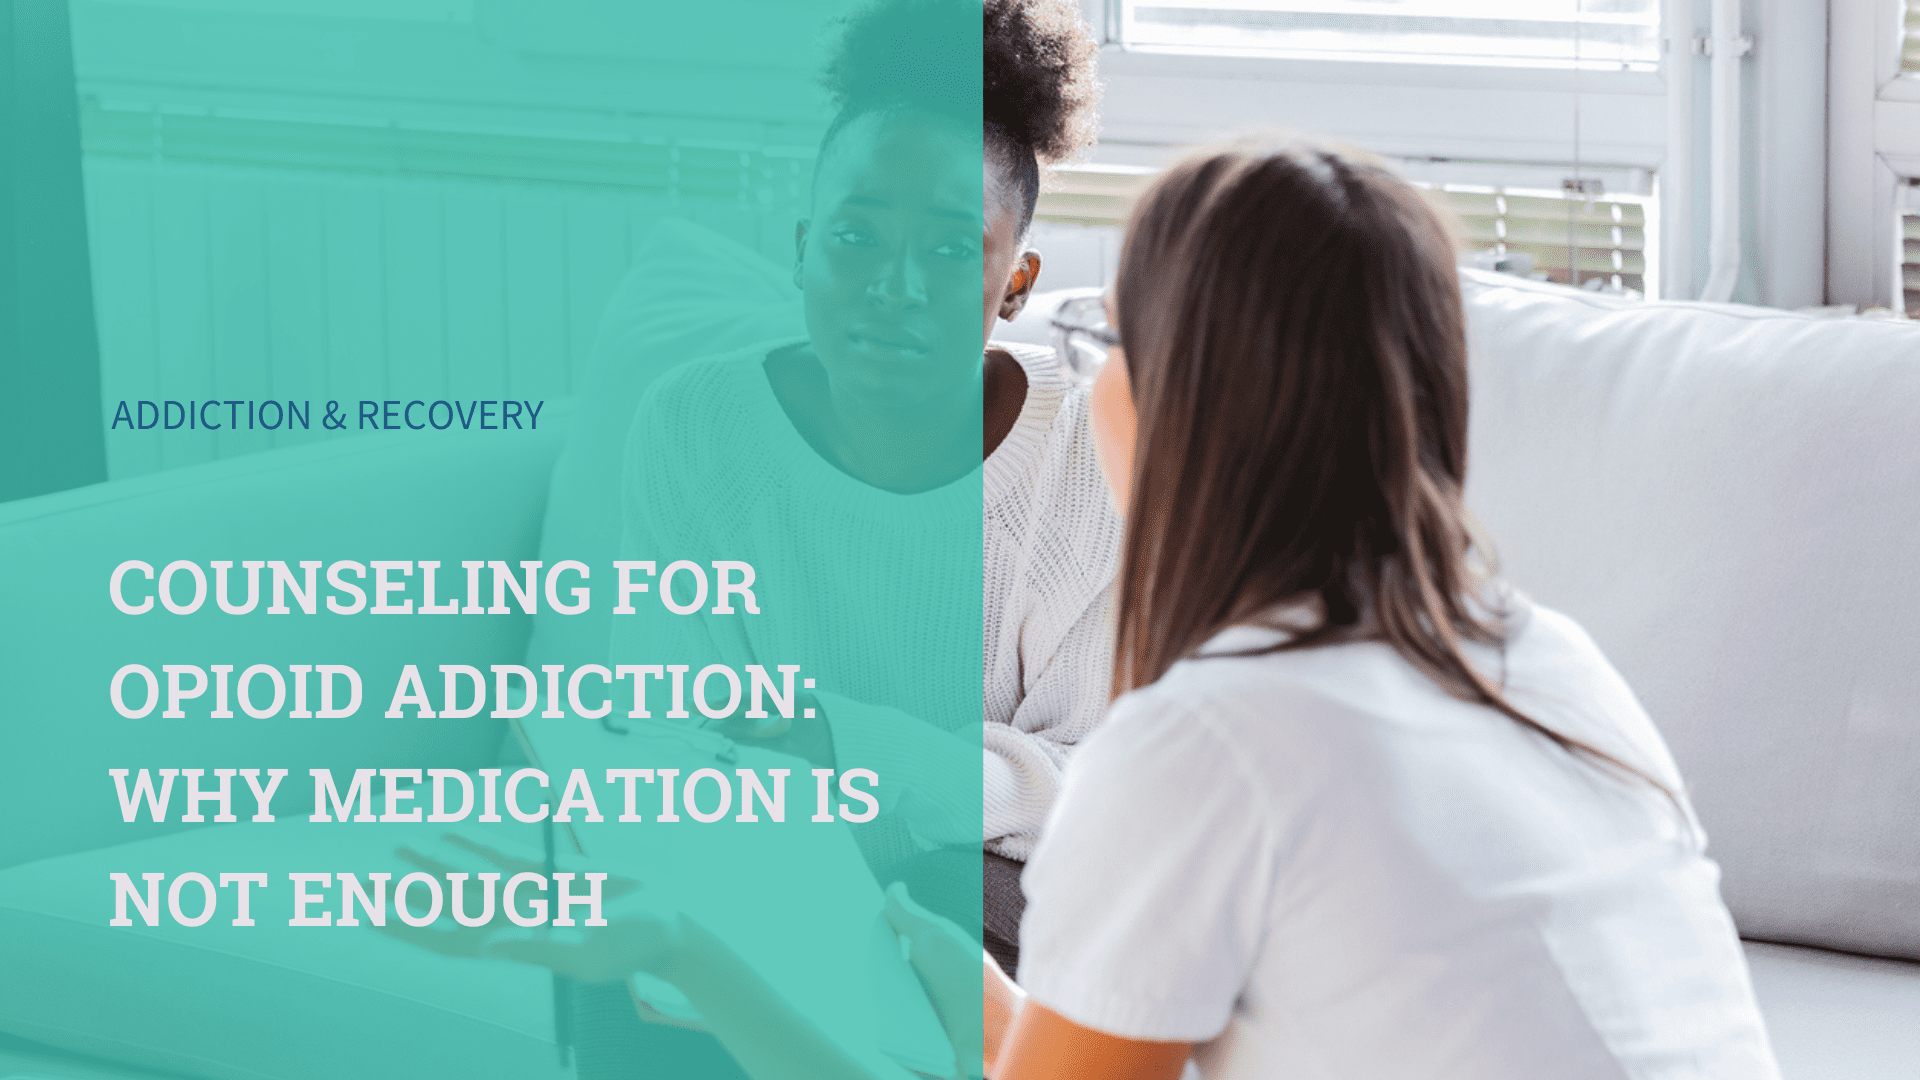 Counseling for Opioid Addiction: Why Medication is Not Enough